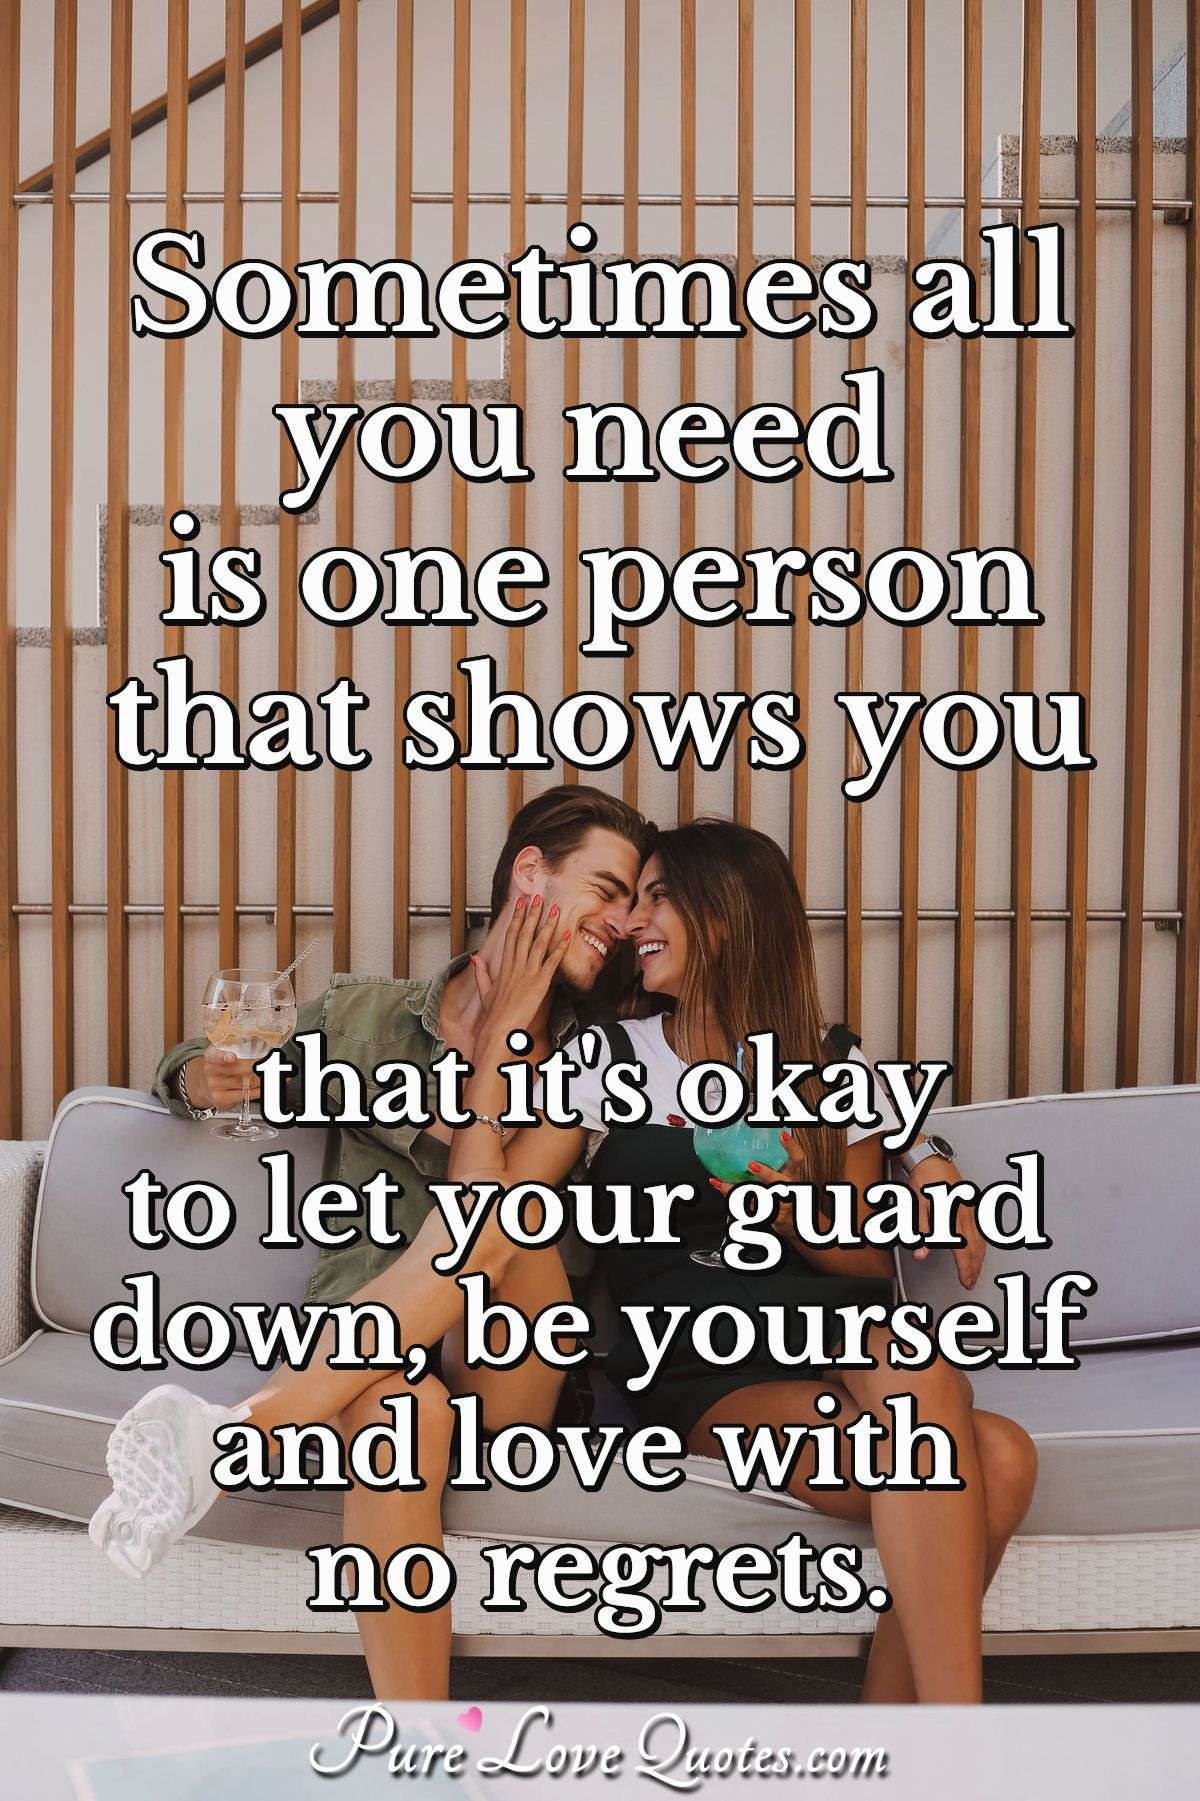 Sometimes all you need is one person that shows you that it's okay to let your guard down, be yourself and love with no regrets. - Anonymous